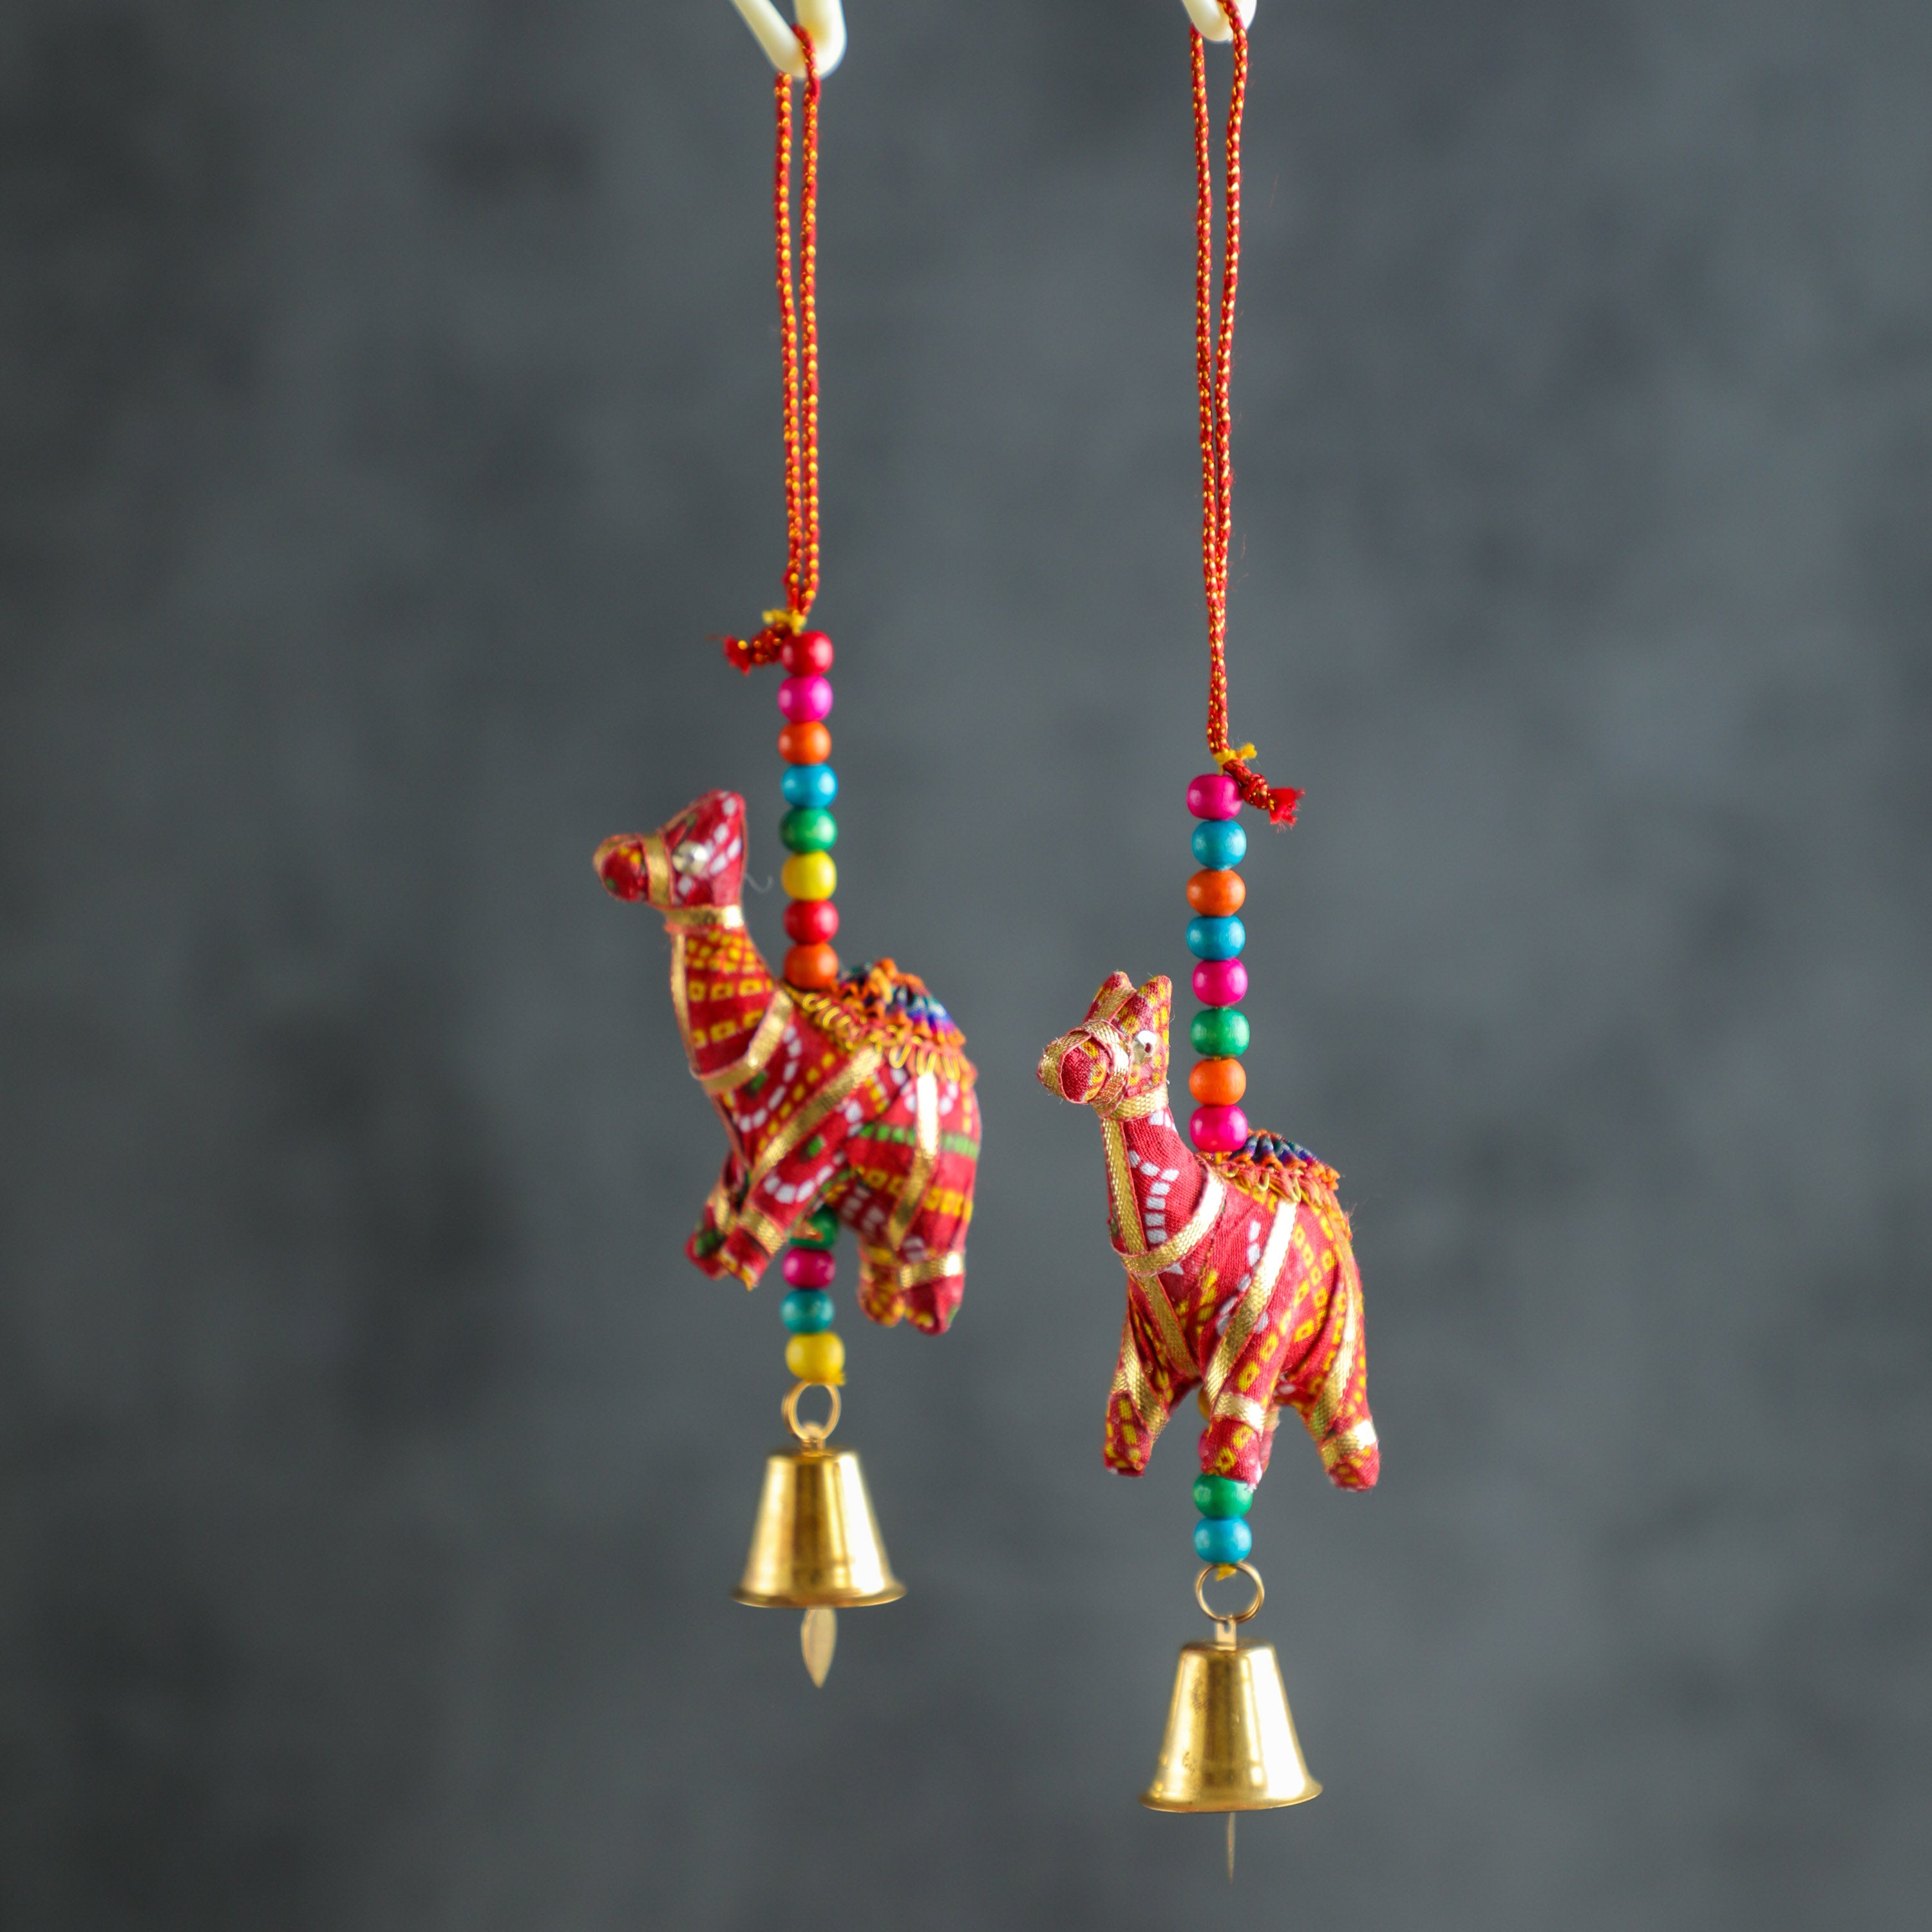 Fabric Camel Hanging Charm for return gifting in the USA